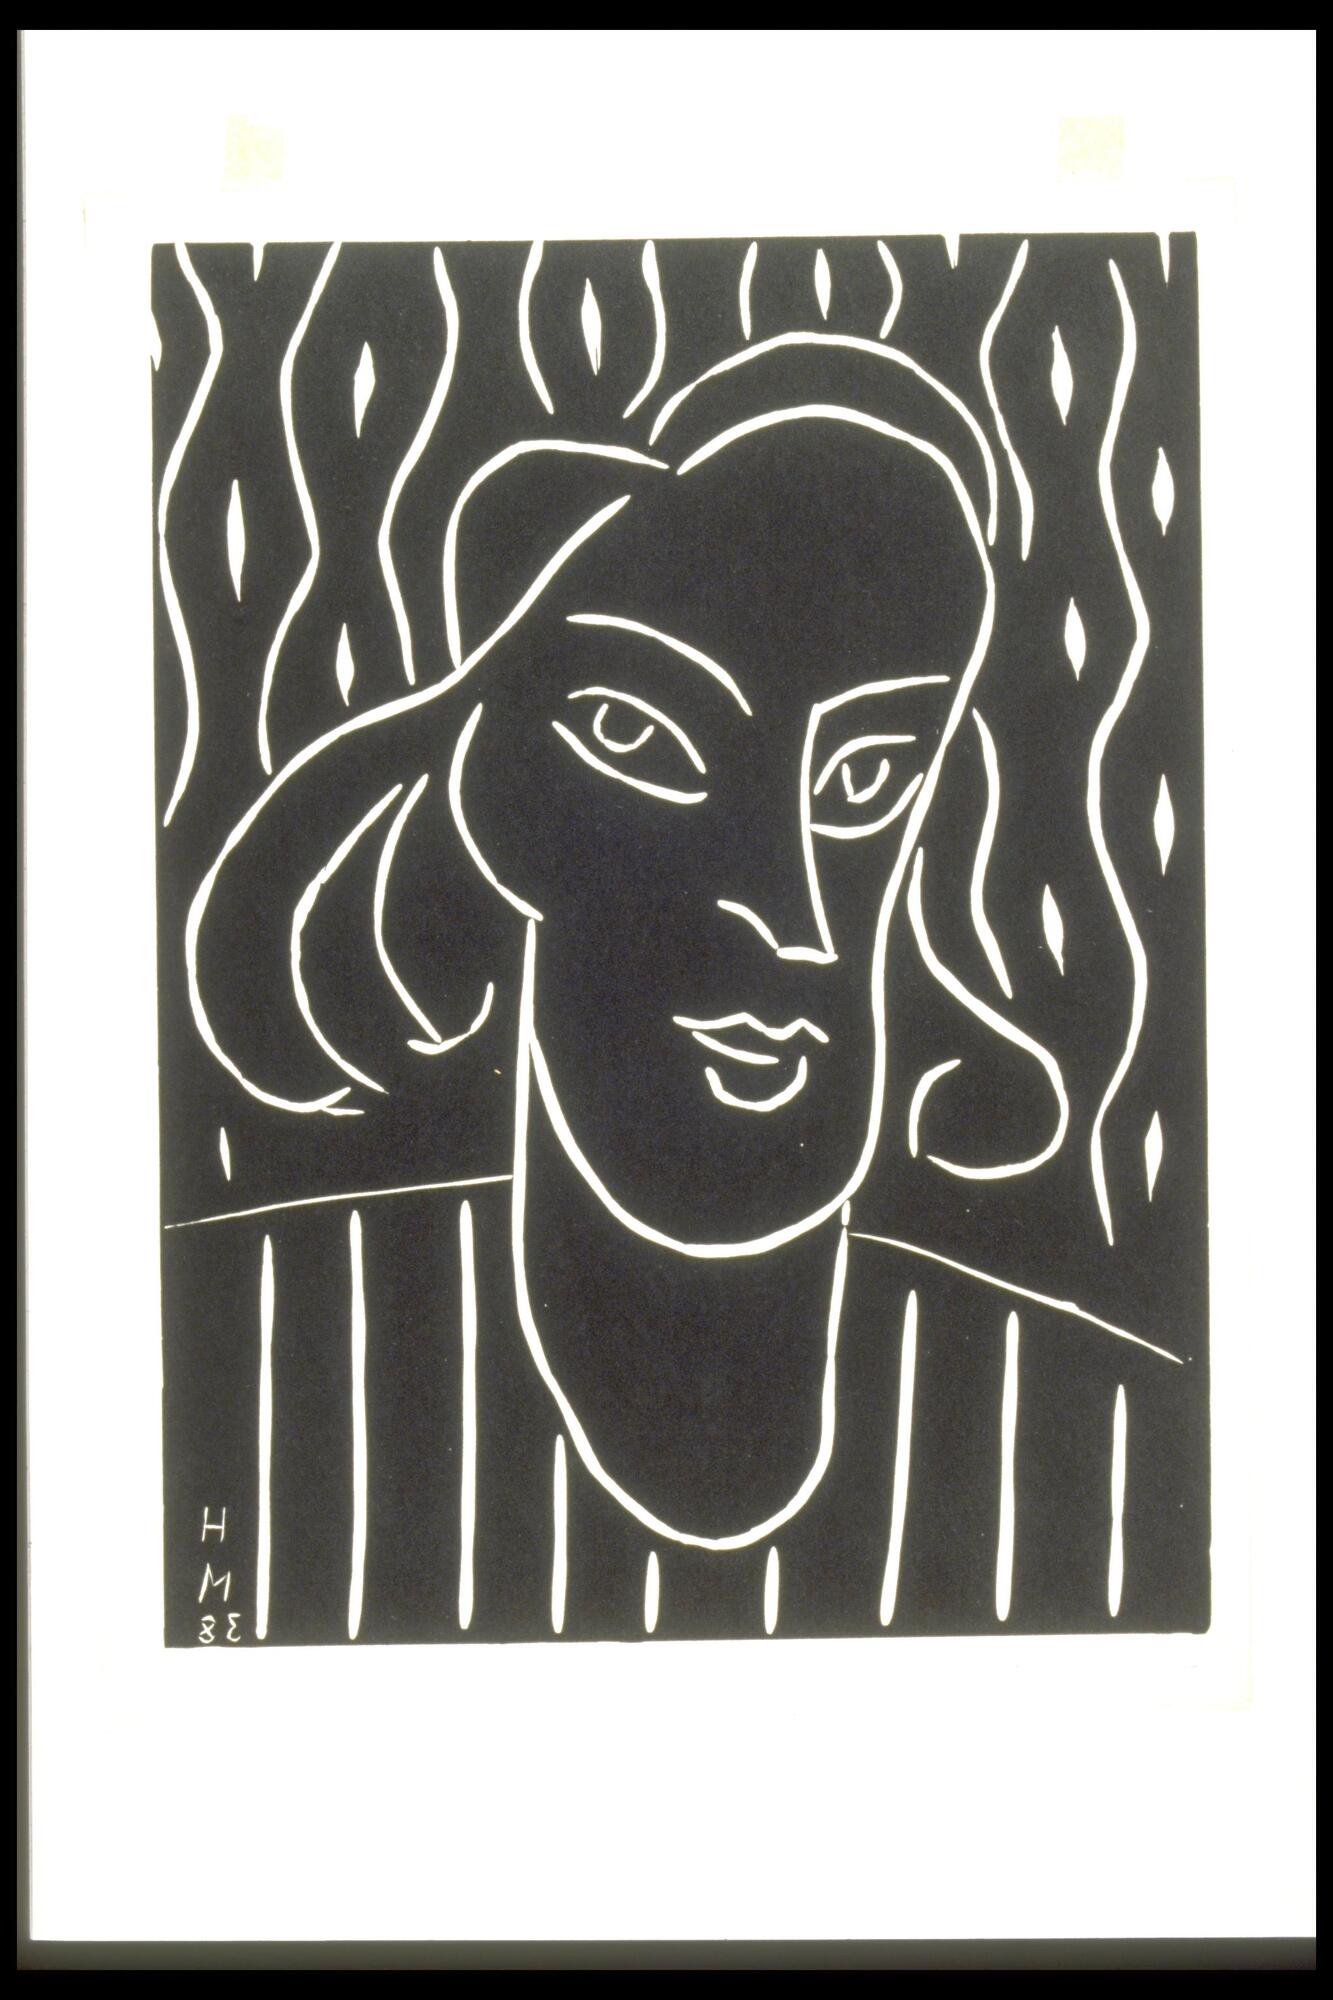 This print is a white line drawing of a woman on black ground. The woman with a longish face and wavy hair wears a striped shirt. Sinuous vertical lines and dashes make up the pattern of the background. 